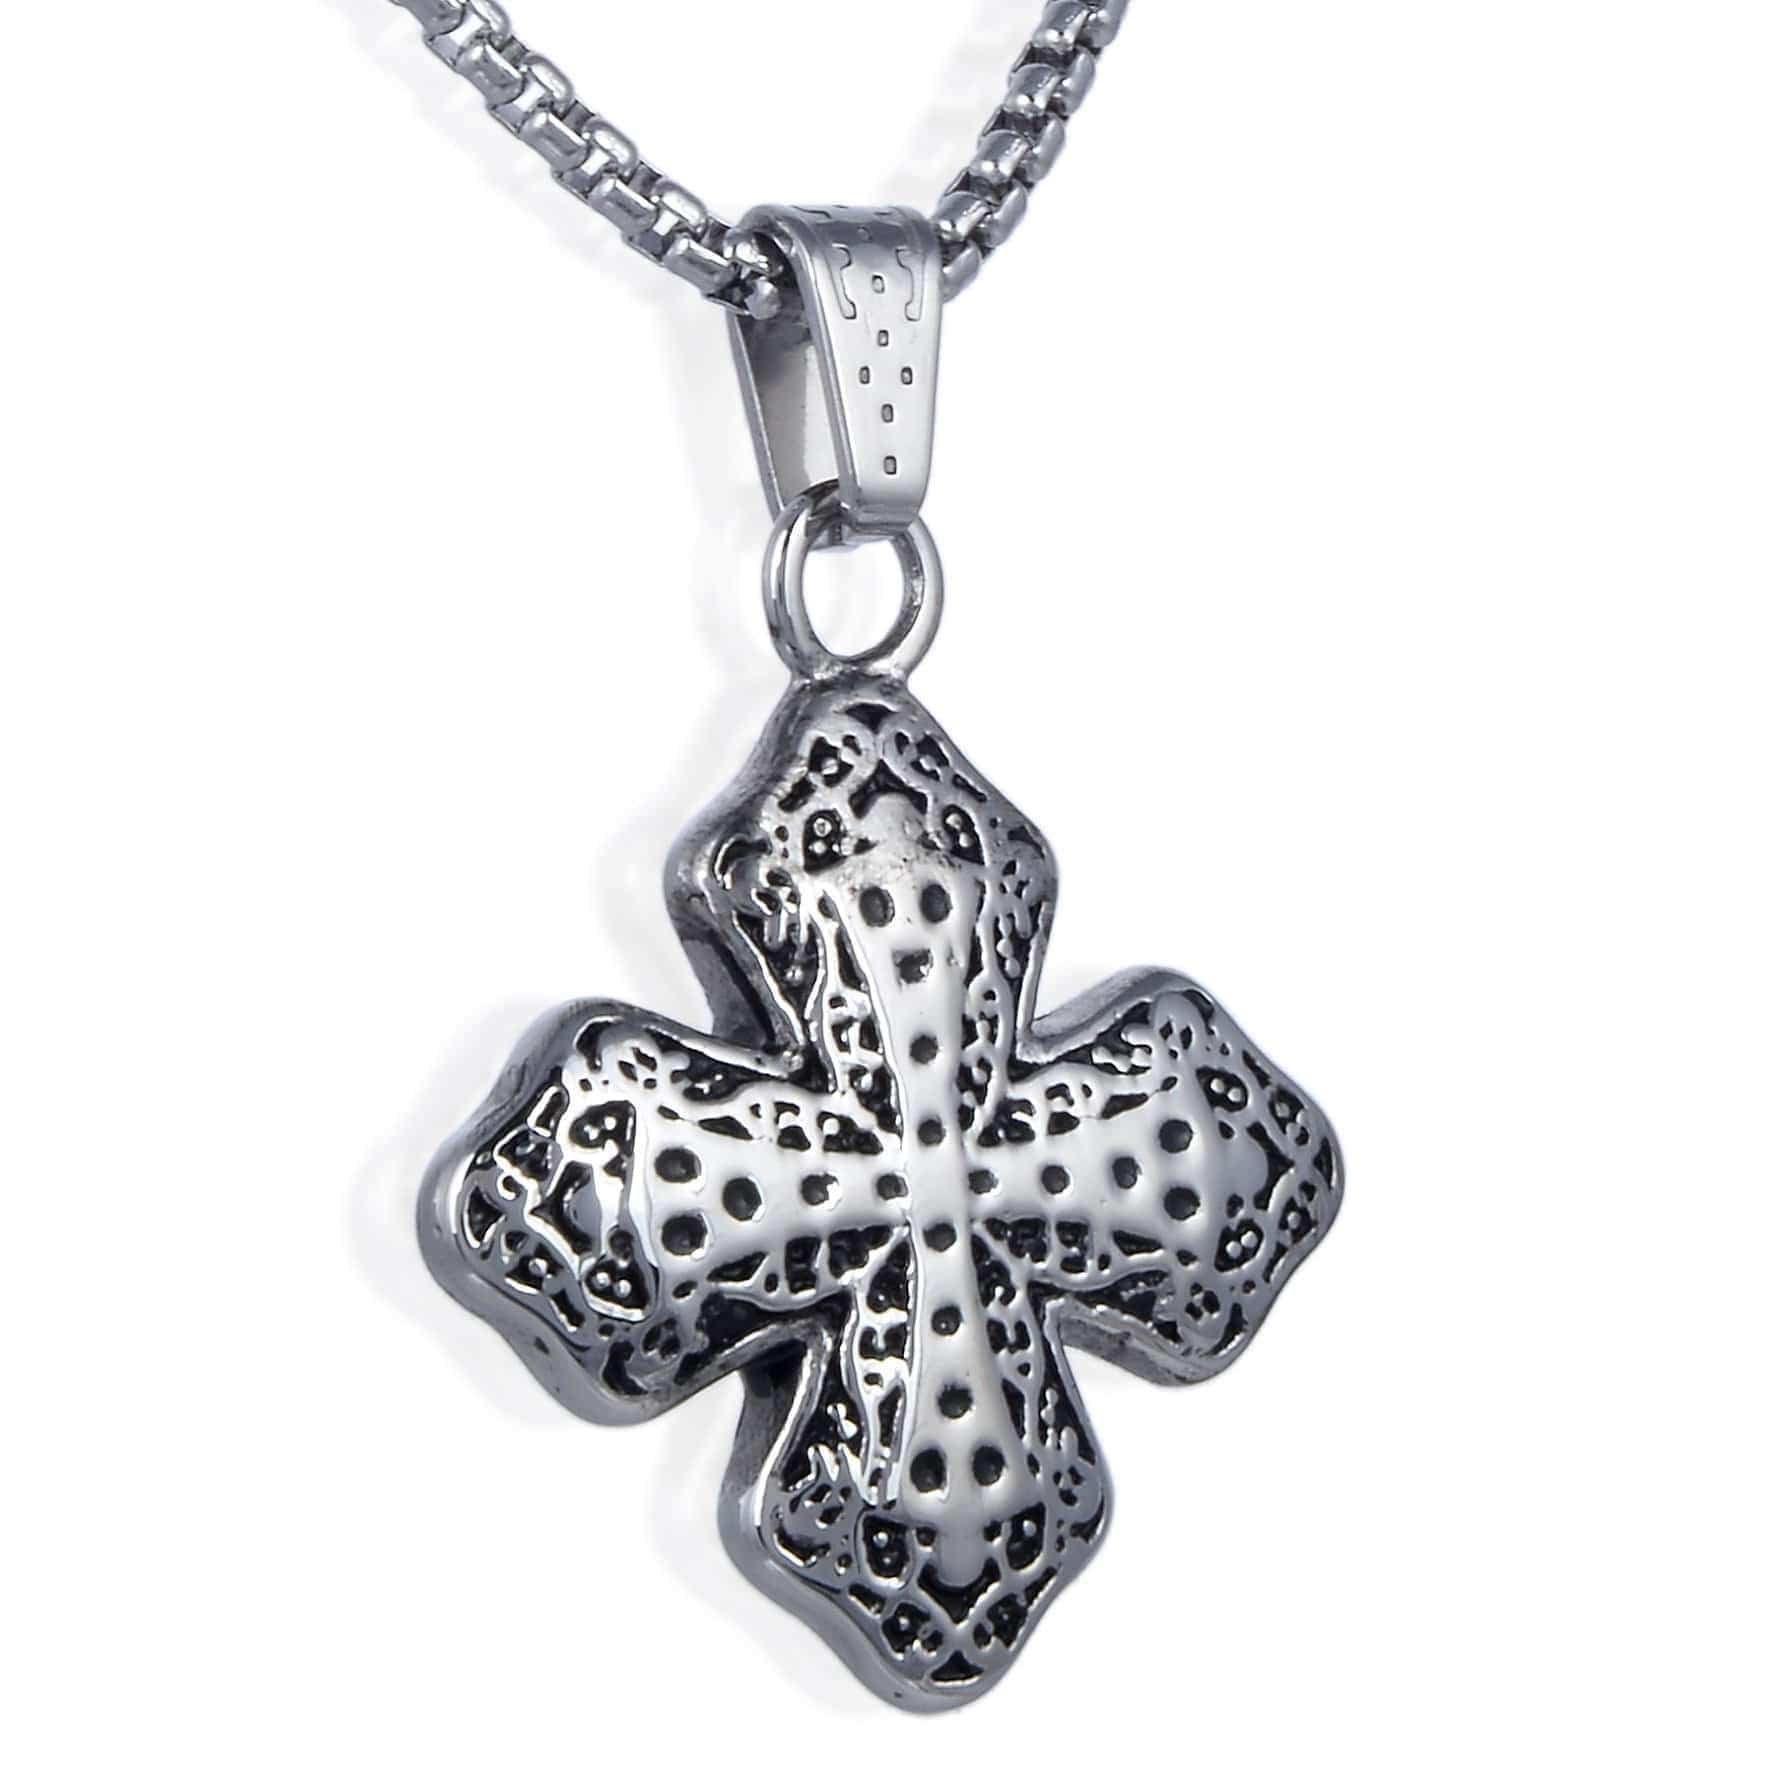 Buy Brass Ethiopian Coptic Cross Pendant, Large African Cross Brass  Religious Necklace Jewelry Online in India - Etsy